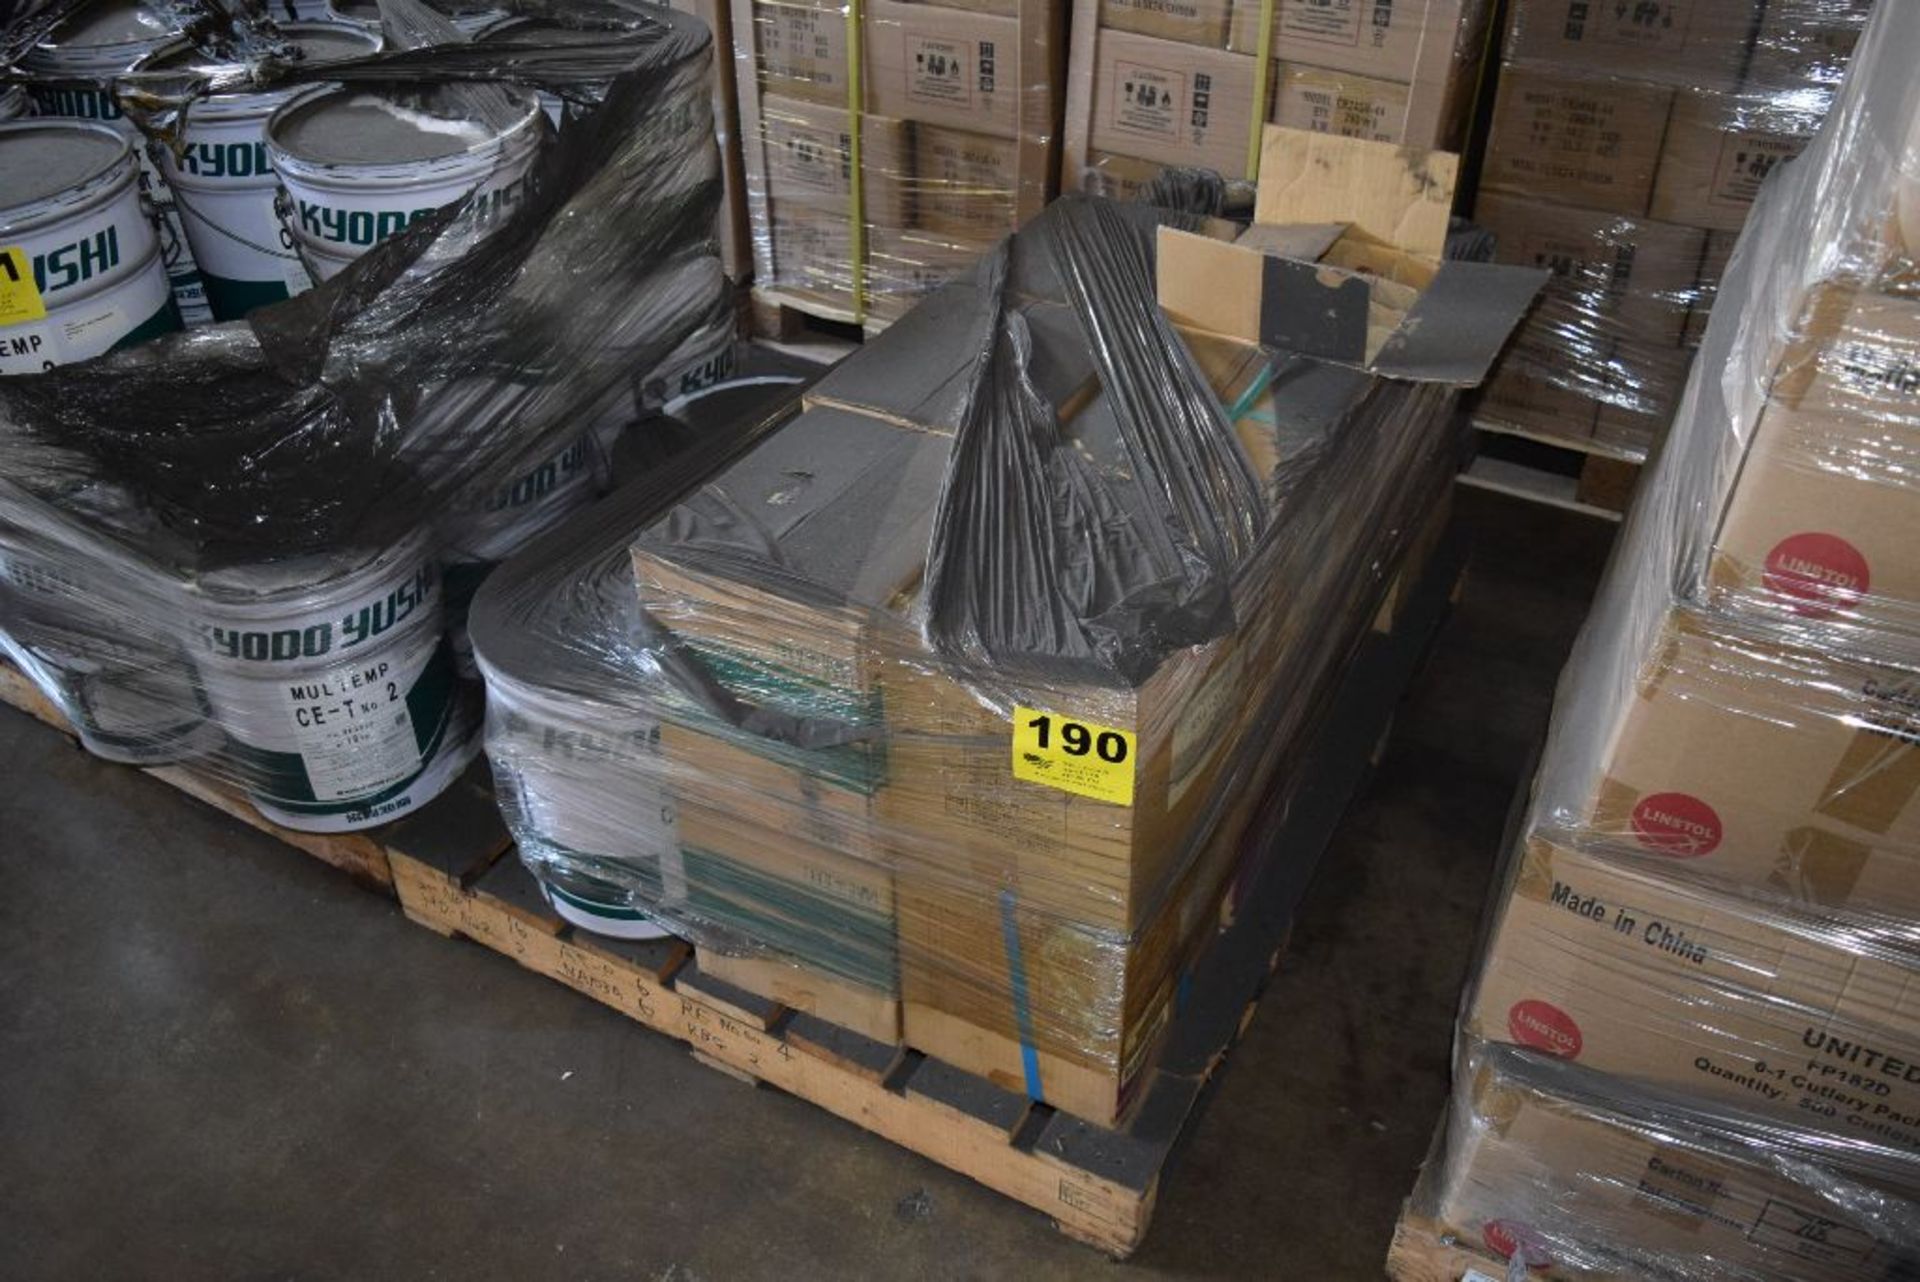 BOXES OF KYODO YUSHI GKL-2-40 GREASE ON ONE SKID